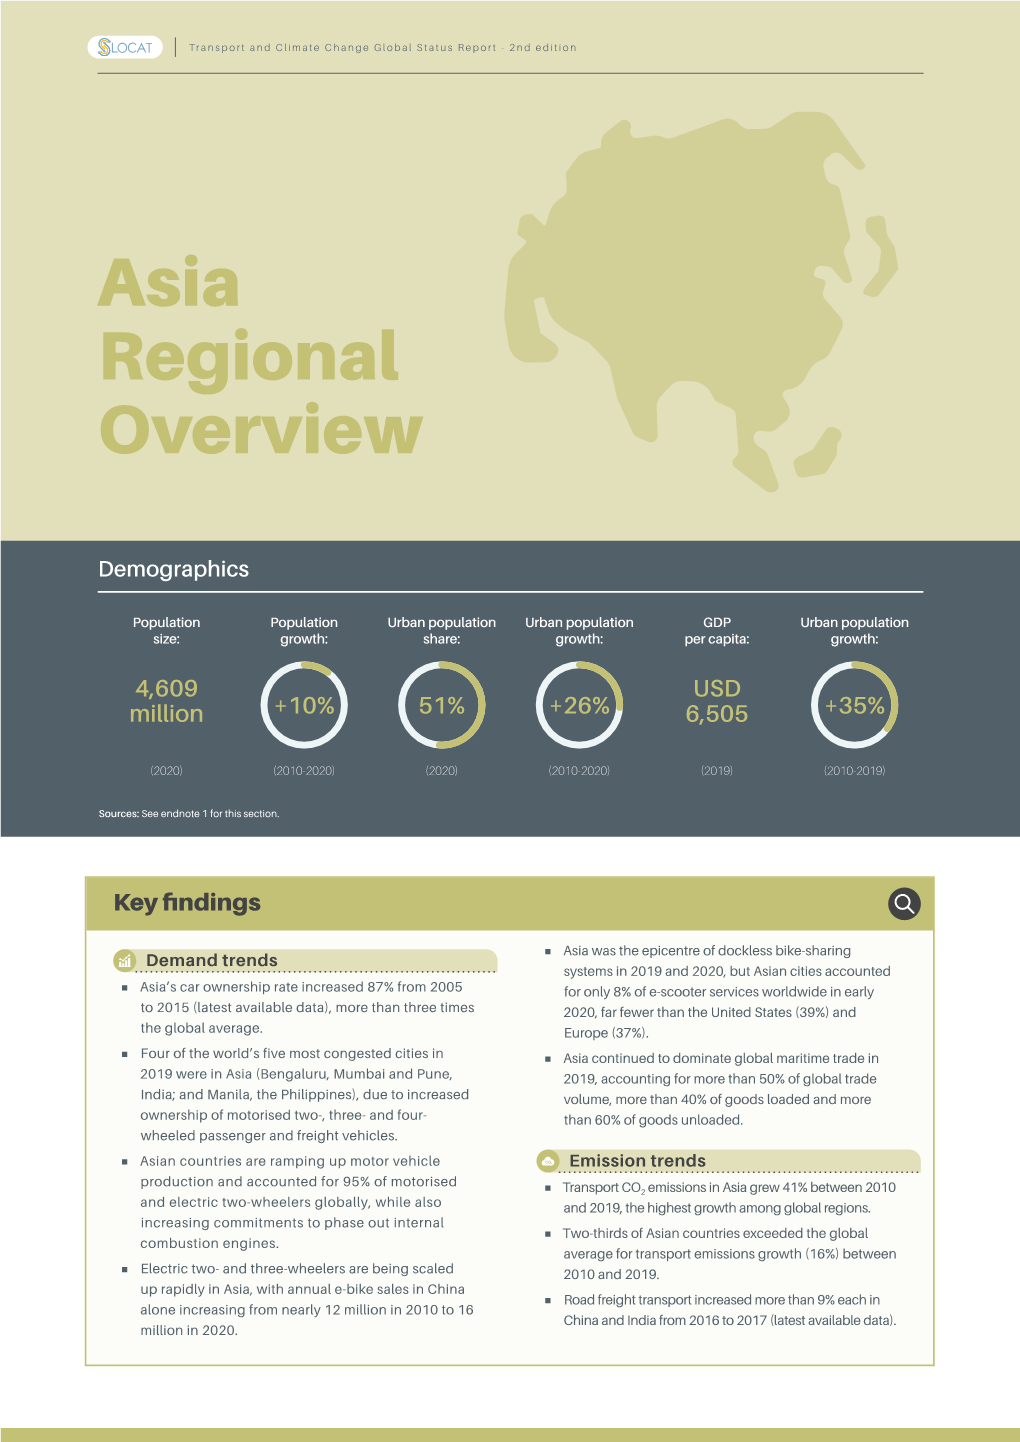 Asia Regional Overview